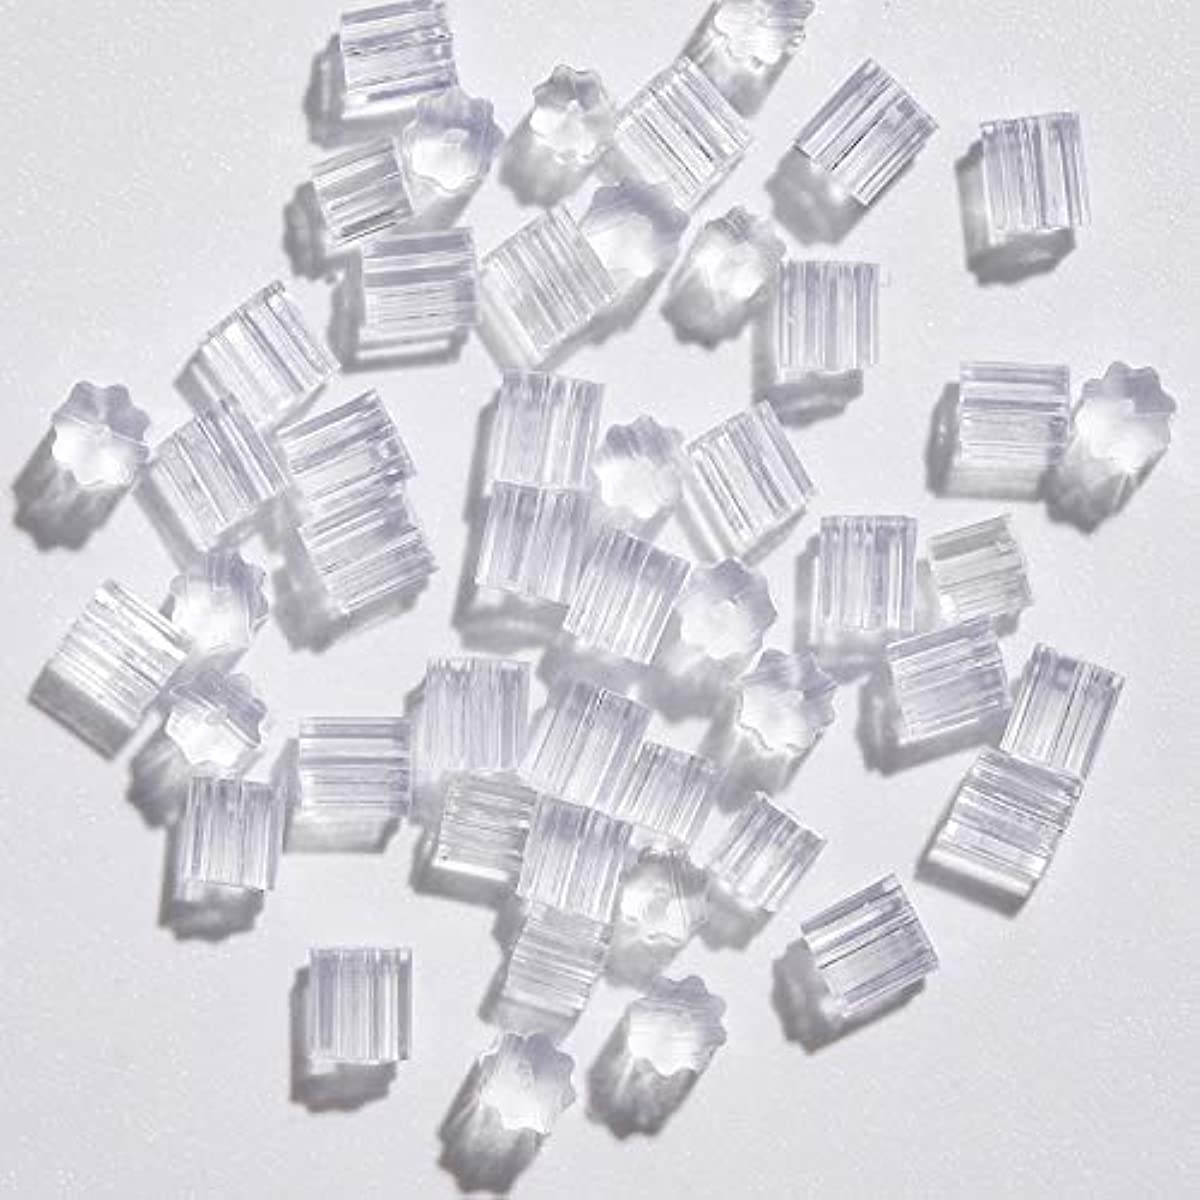  60 PCS Full-Cover Silicone Earring Backs for Studs, Clear  Earring Backs Clear Rubber Earring Backings Safety Back Pads Backstops  Replacement for Stabilize Earring Studs Hoops Hooks